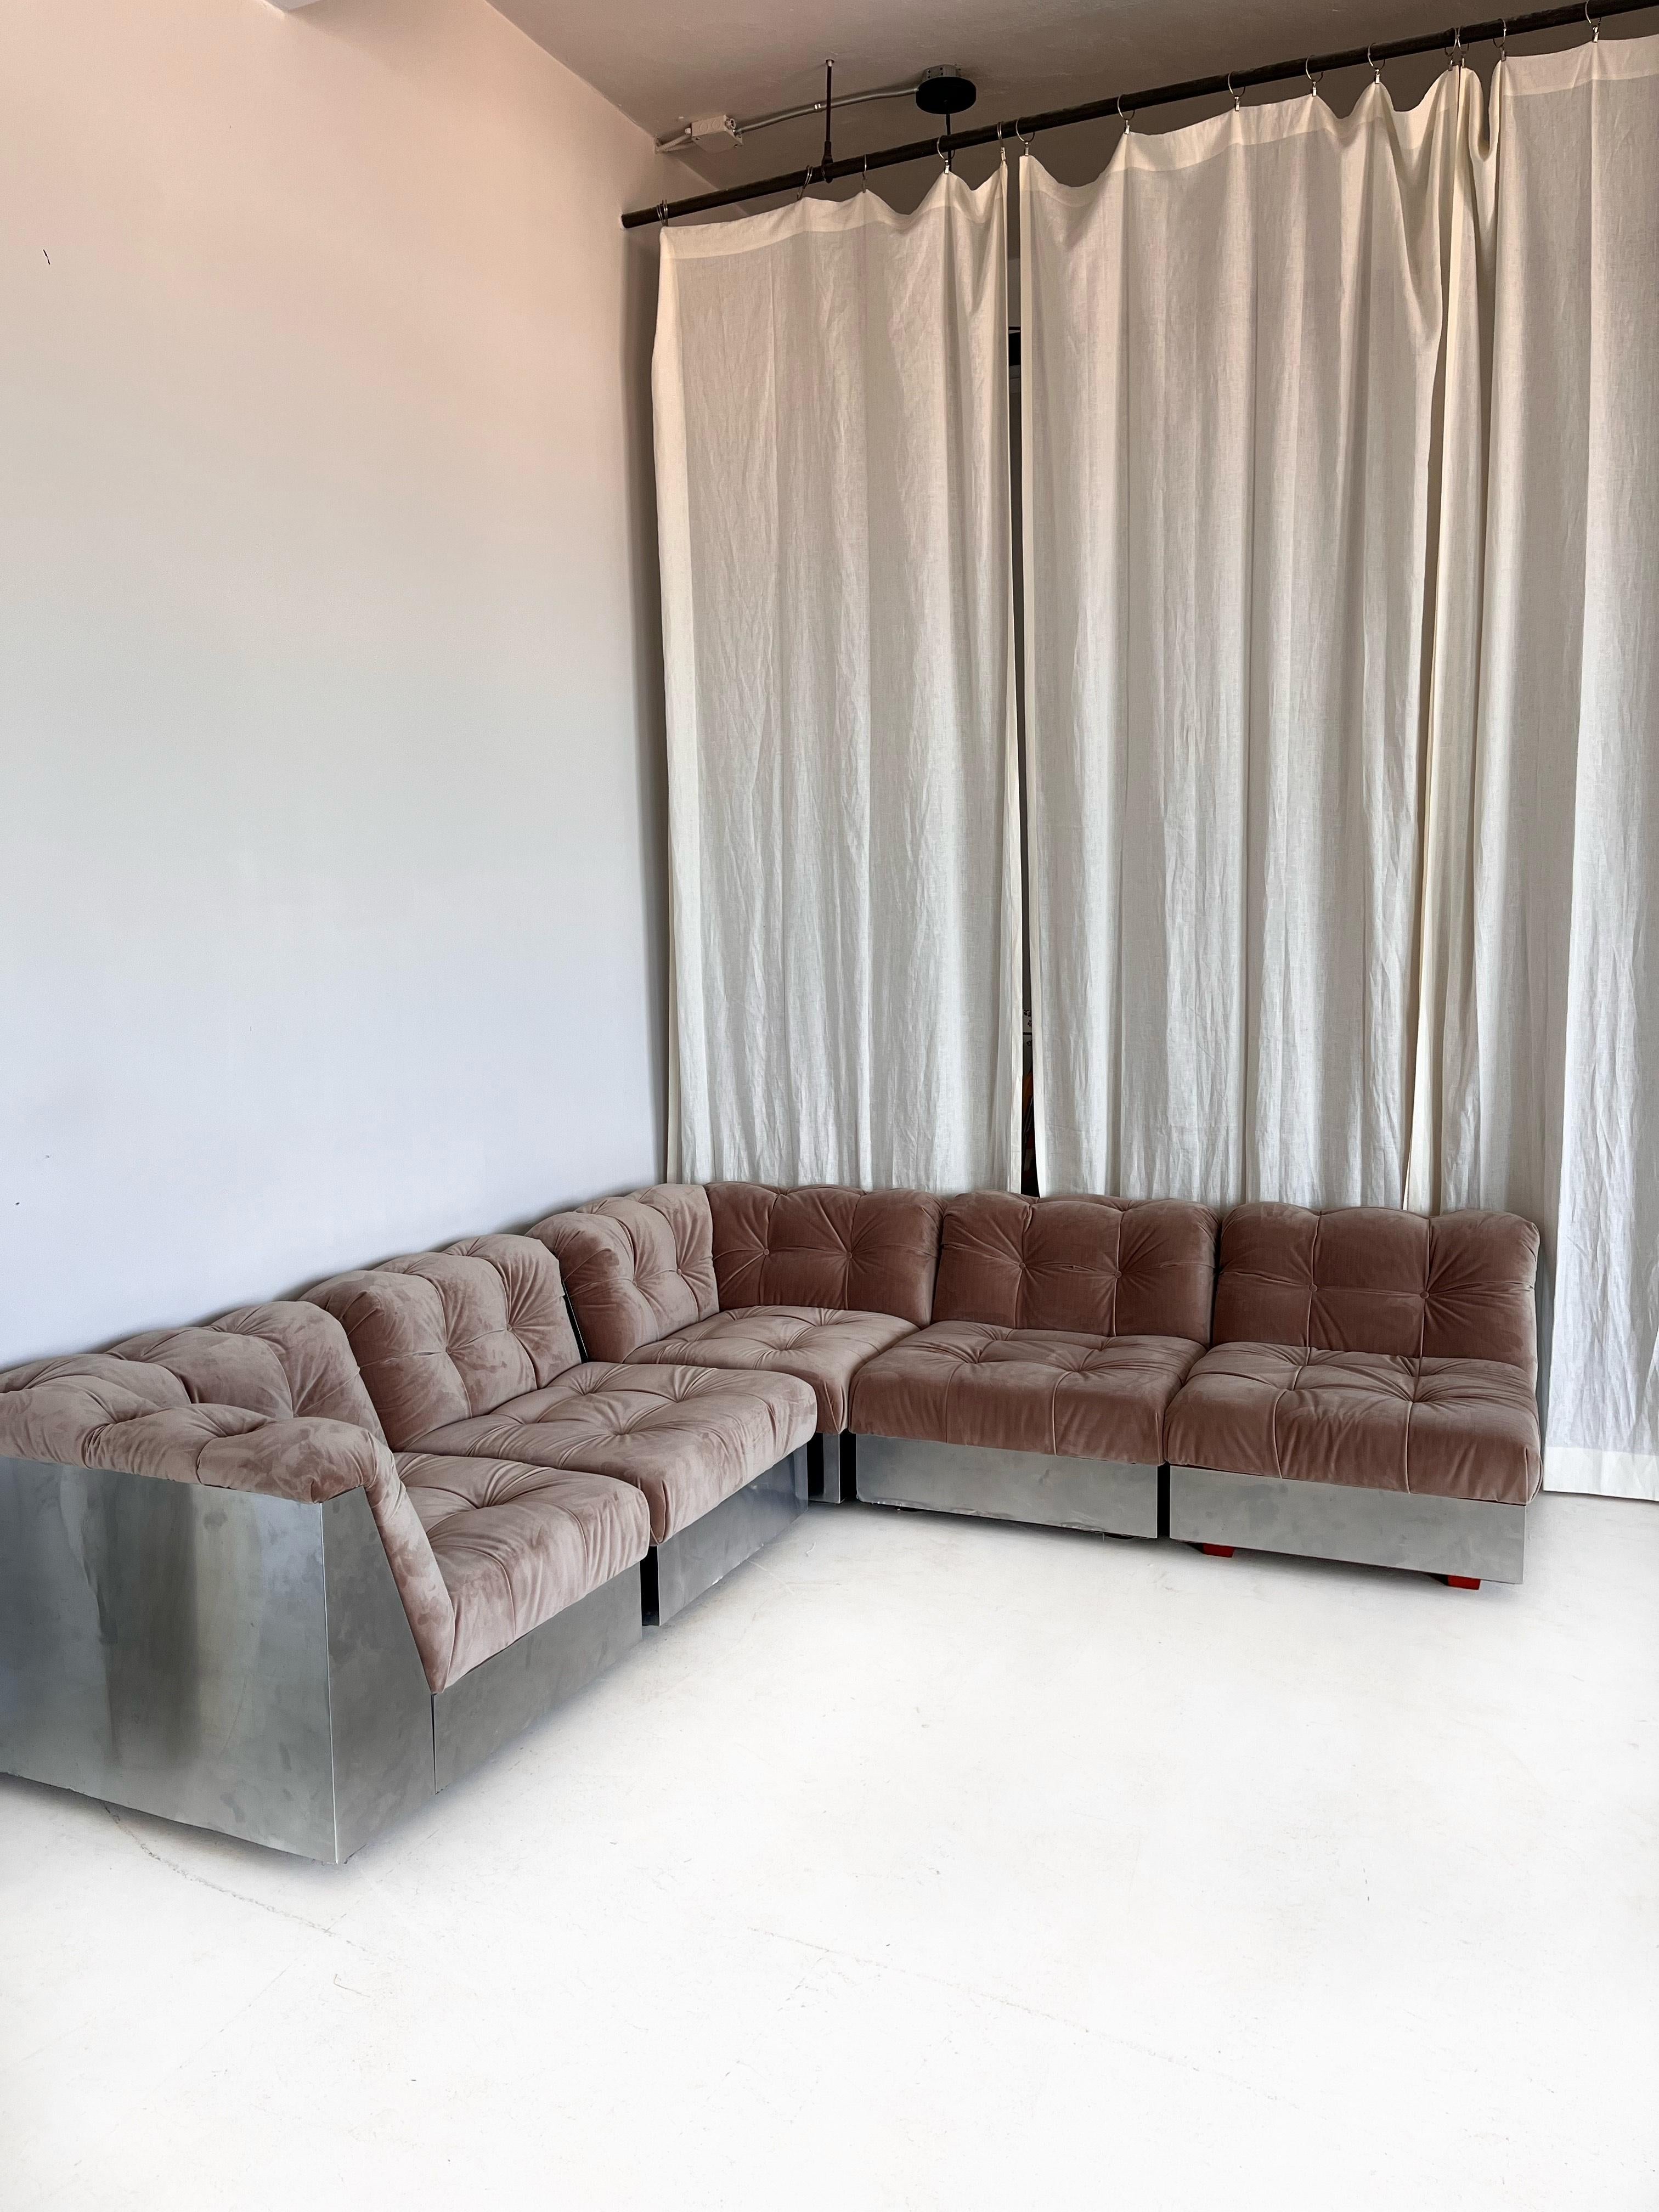 This vintage sectional Giorgio Montani sofa with chrome base and velvet seats was made in the 70's by Souplina, in France. It was professionally reupholstered with a high quality velvet in a timeless taupe-brown color. The stainless steel base was